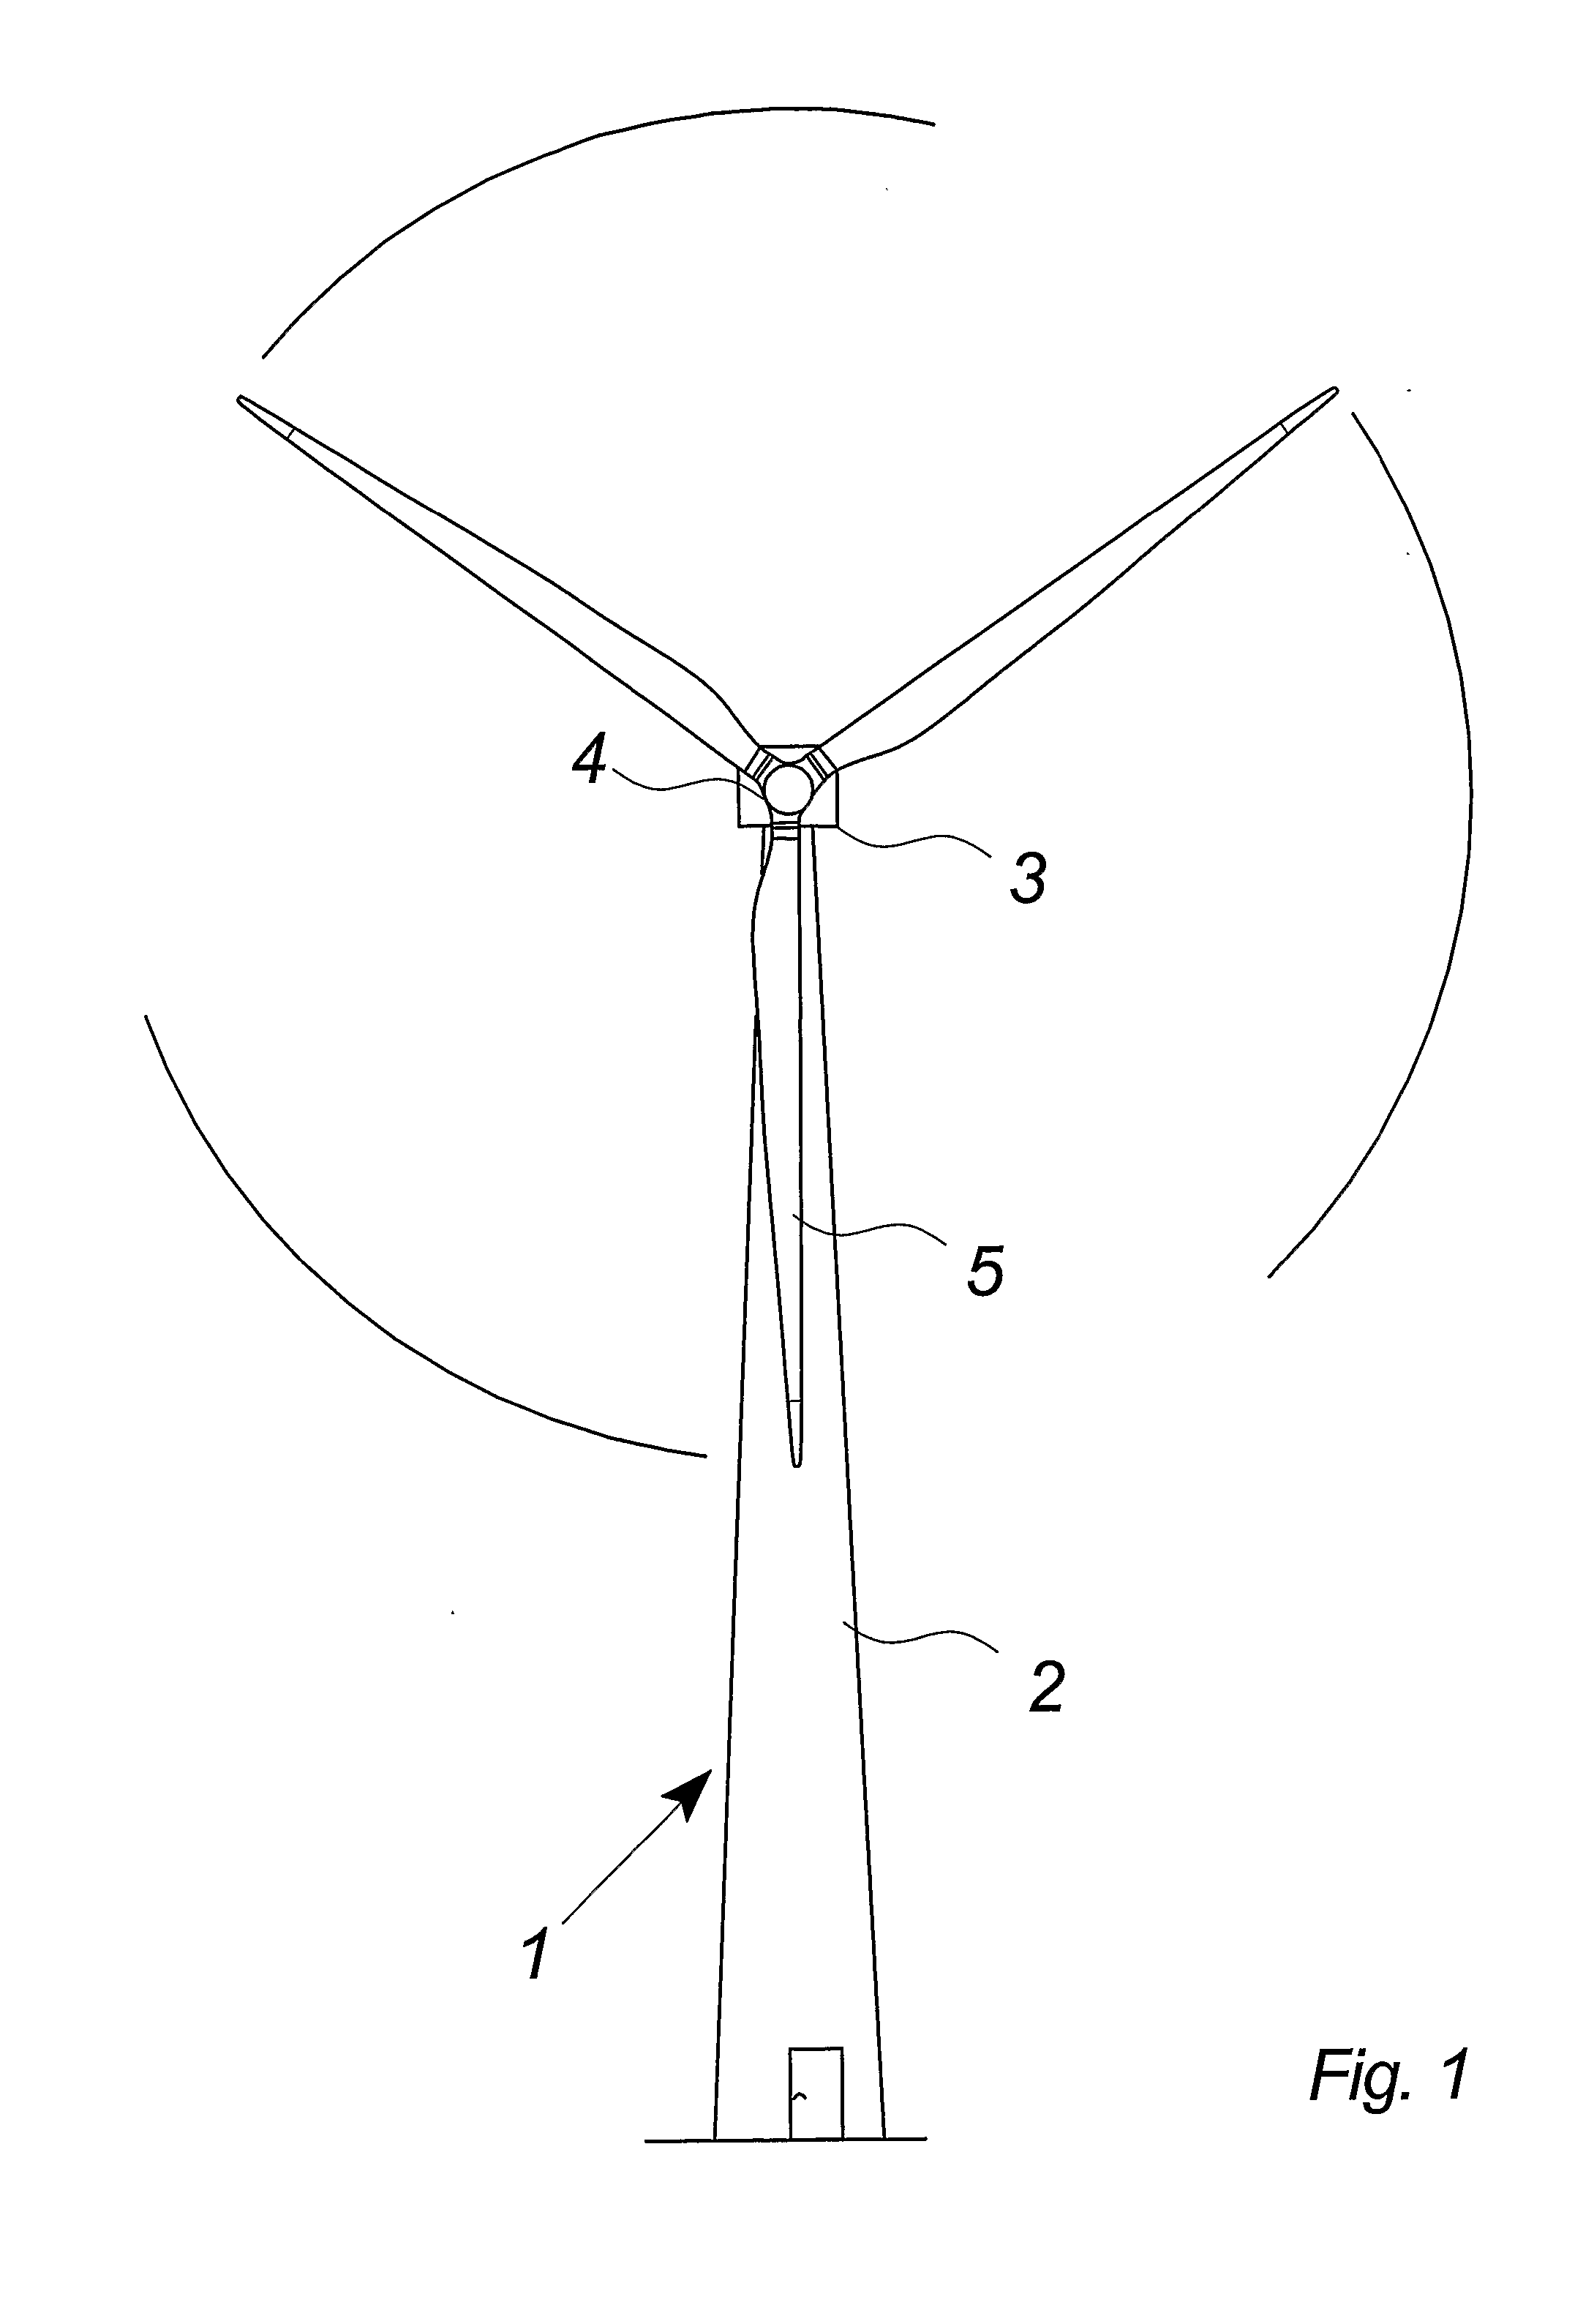 Wind Turbine Blades Made of Two Separate Sections, and Method of Assembly